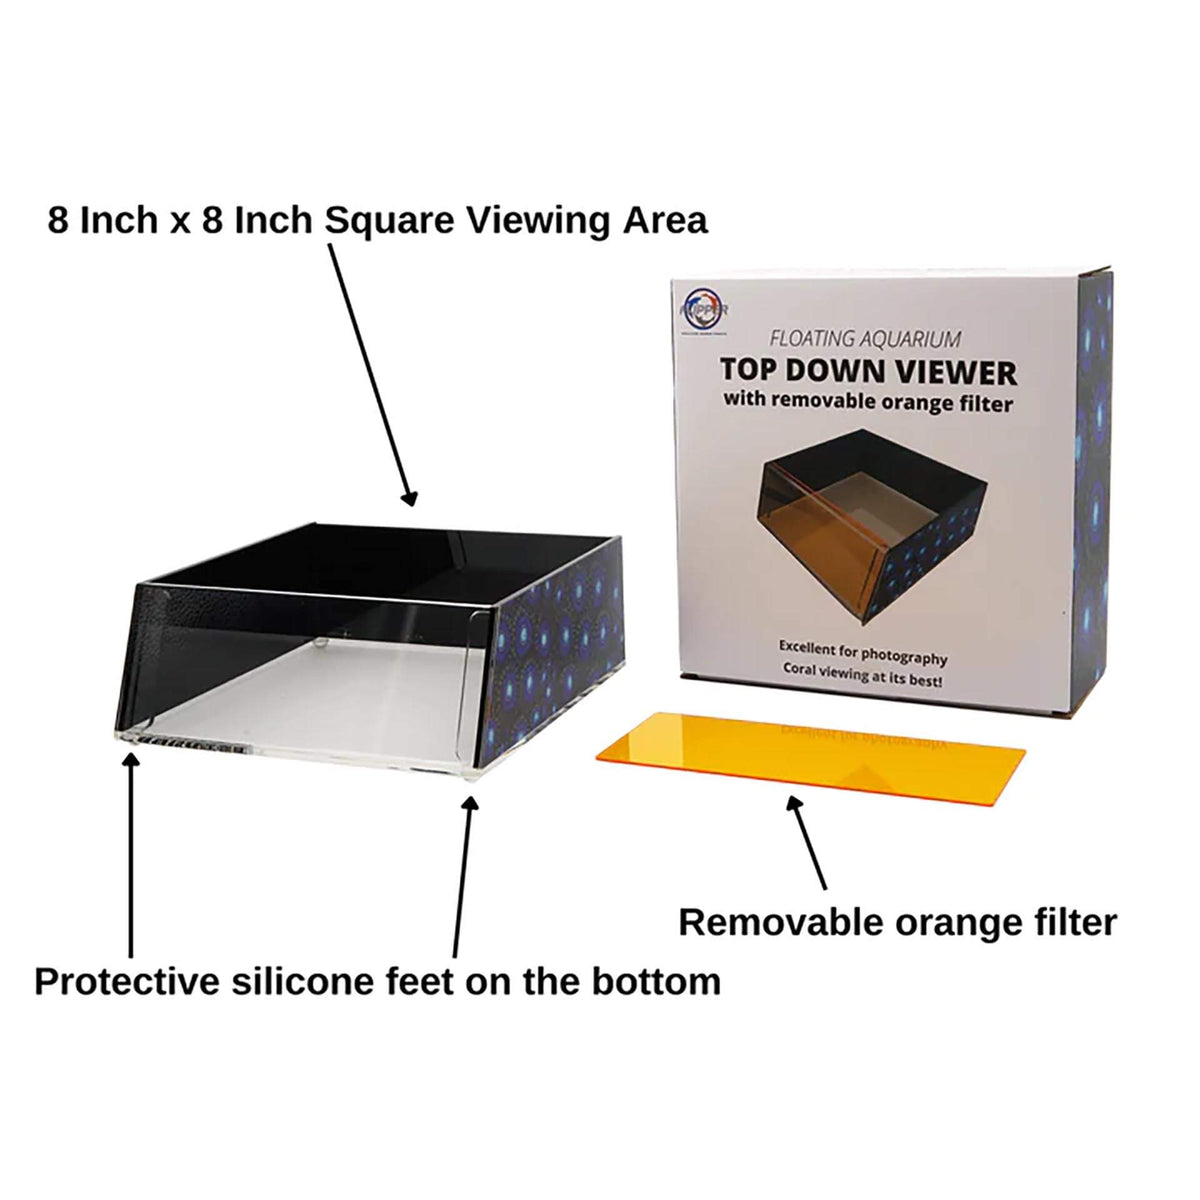 Flipper Top Down Viewer with Removable Orange Filter - 8&quot; Ultra Clear Viewing Area